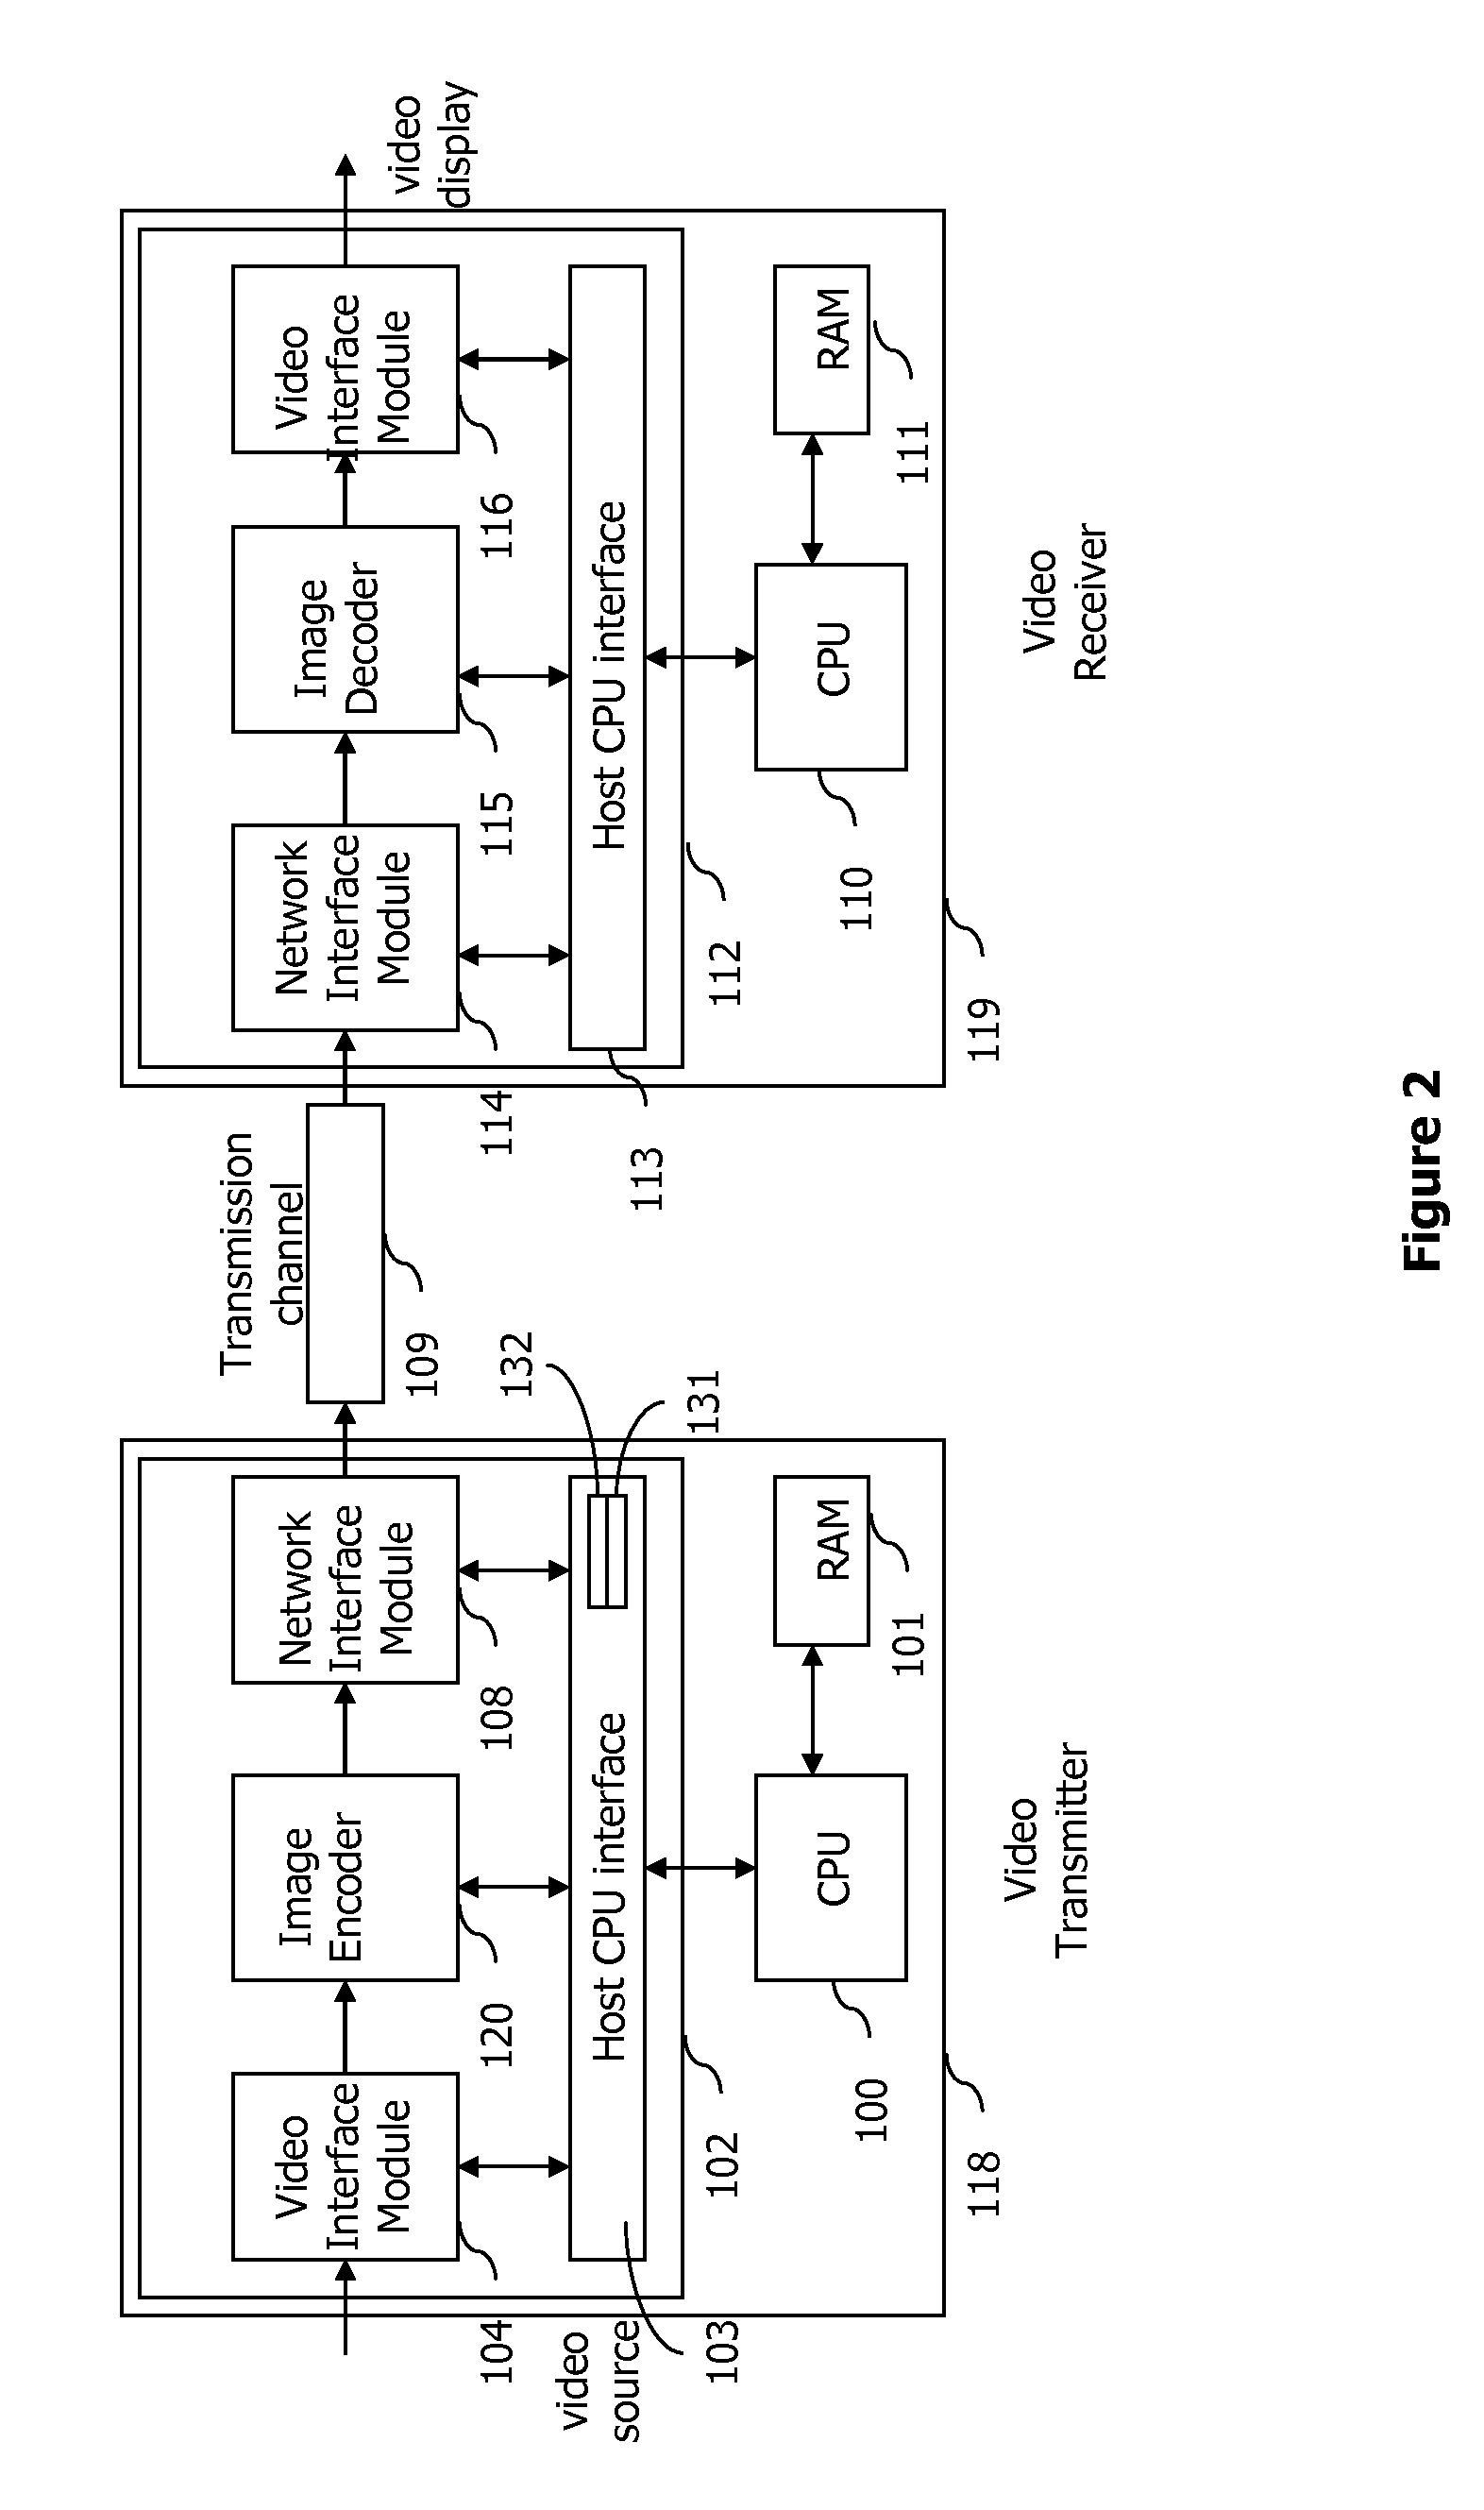 Method for Sending Compressed Data Representing a Digital Image and Corresponding Device